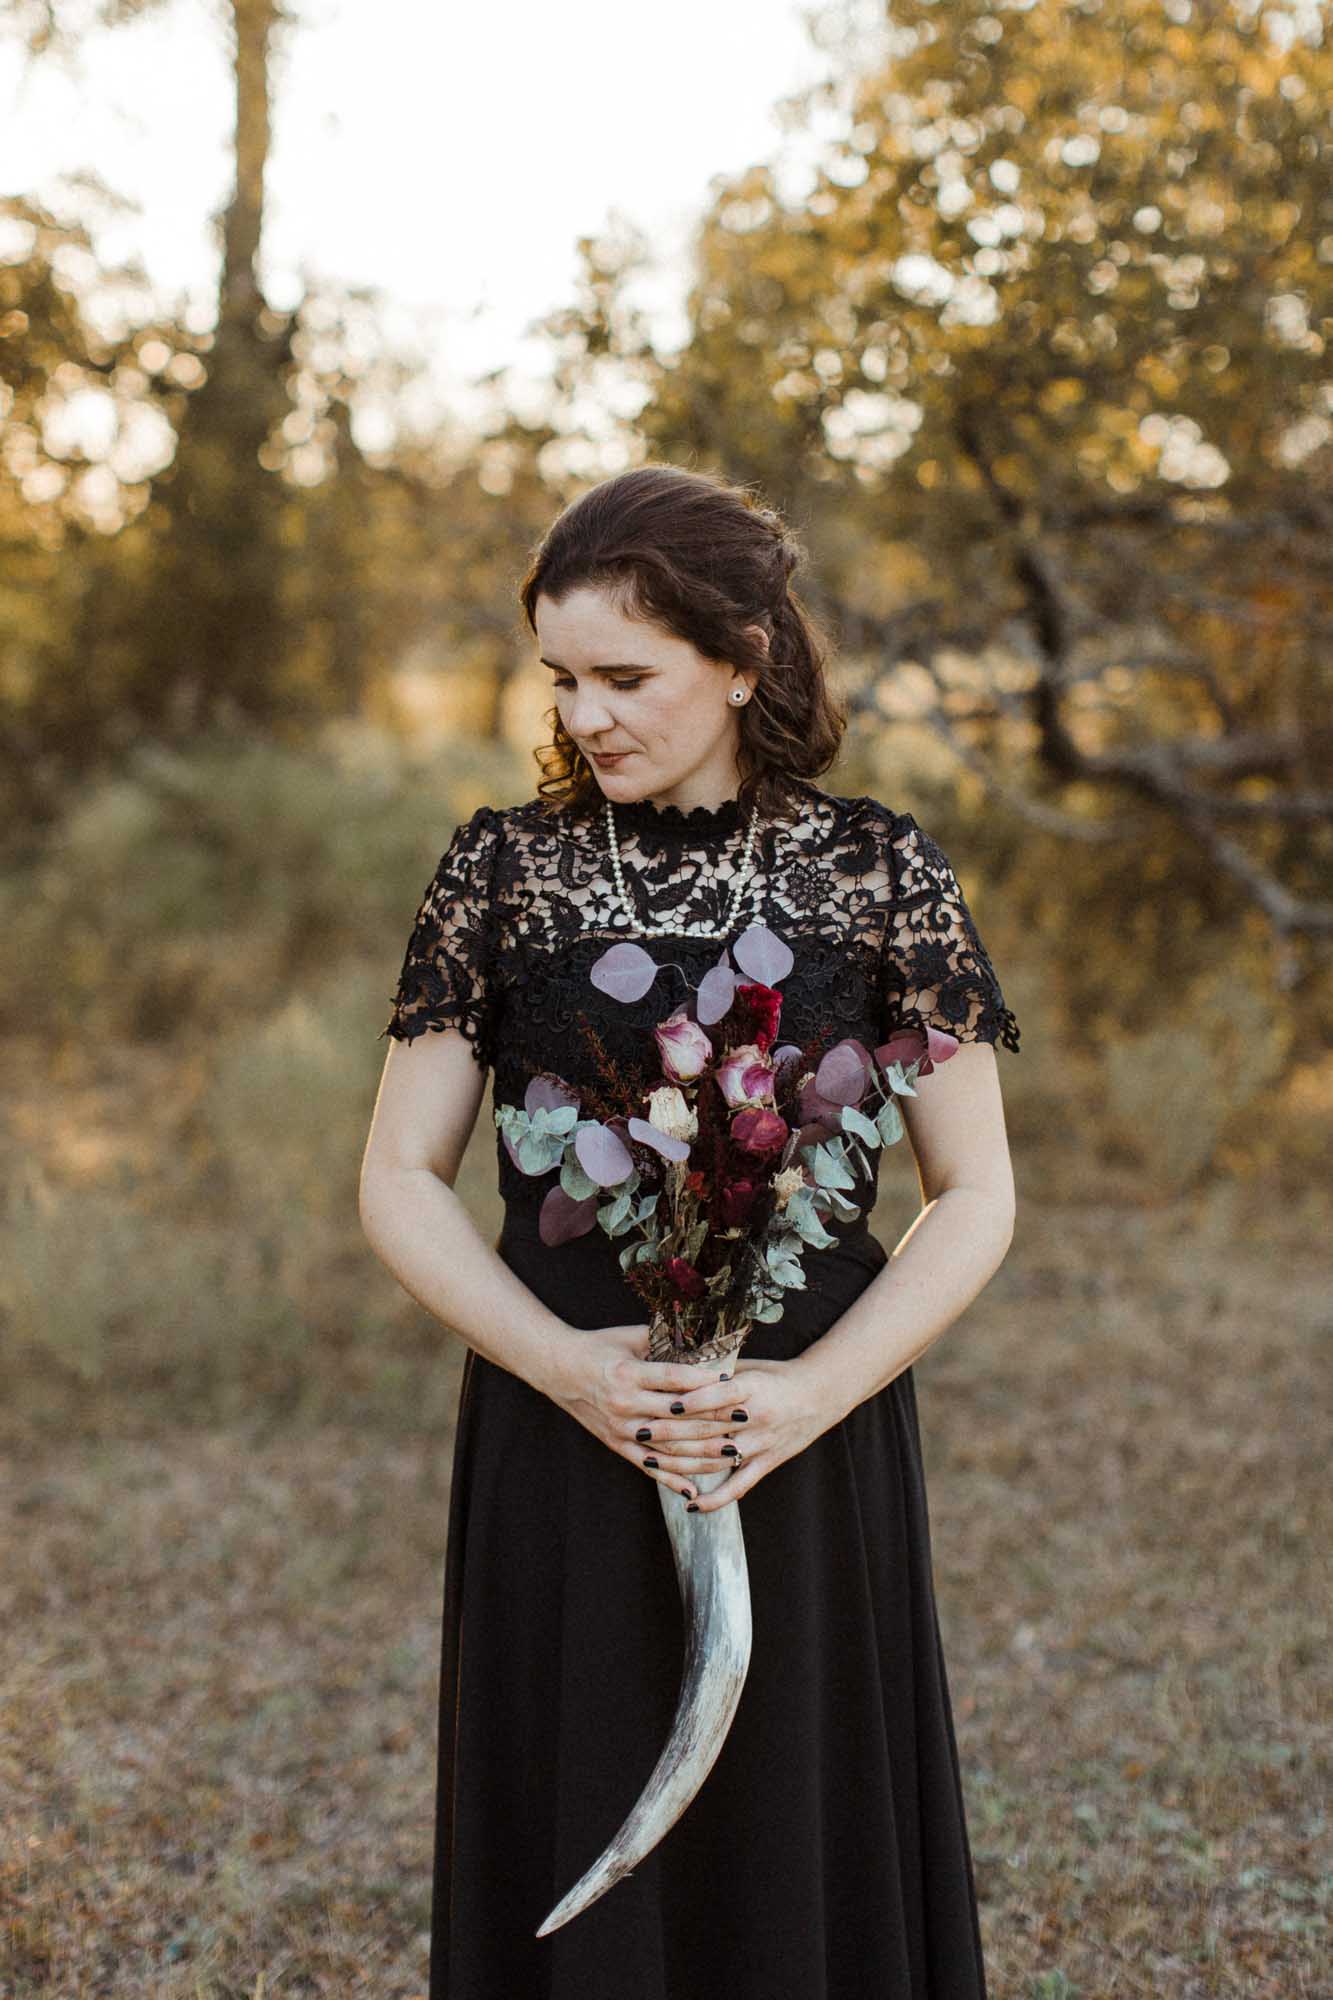 Beautifully gothic Texas wedding with creative details, photo by Leah Thomason Photography, featured on Equally Wed, the LGBTQ+ wedding magazine bride in black wedding gown holding bouquet in animal horn